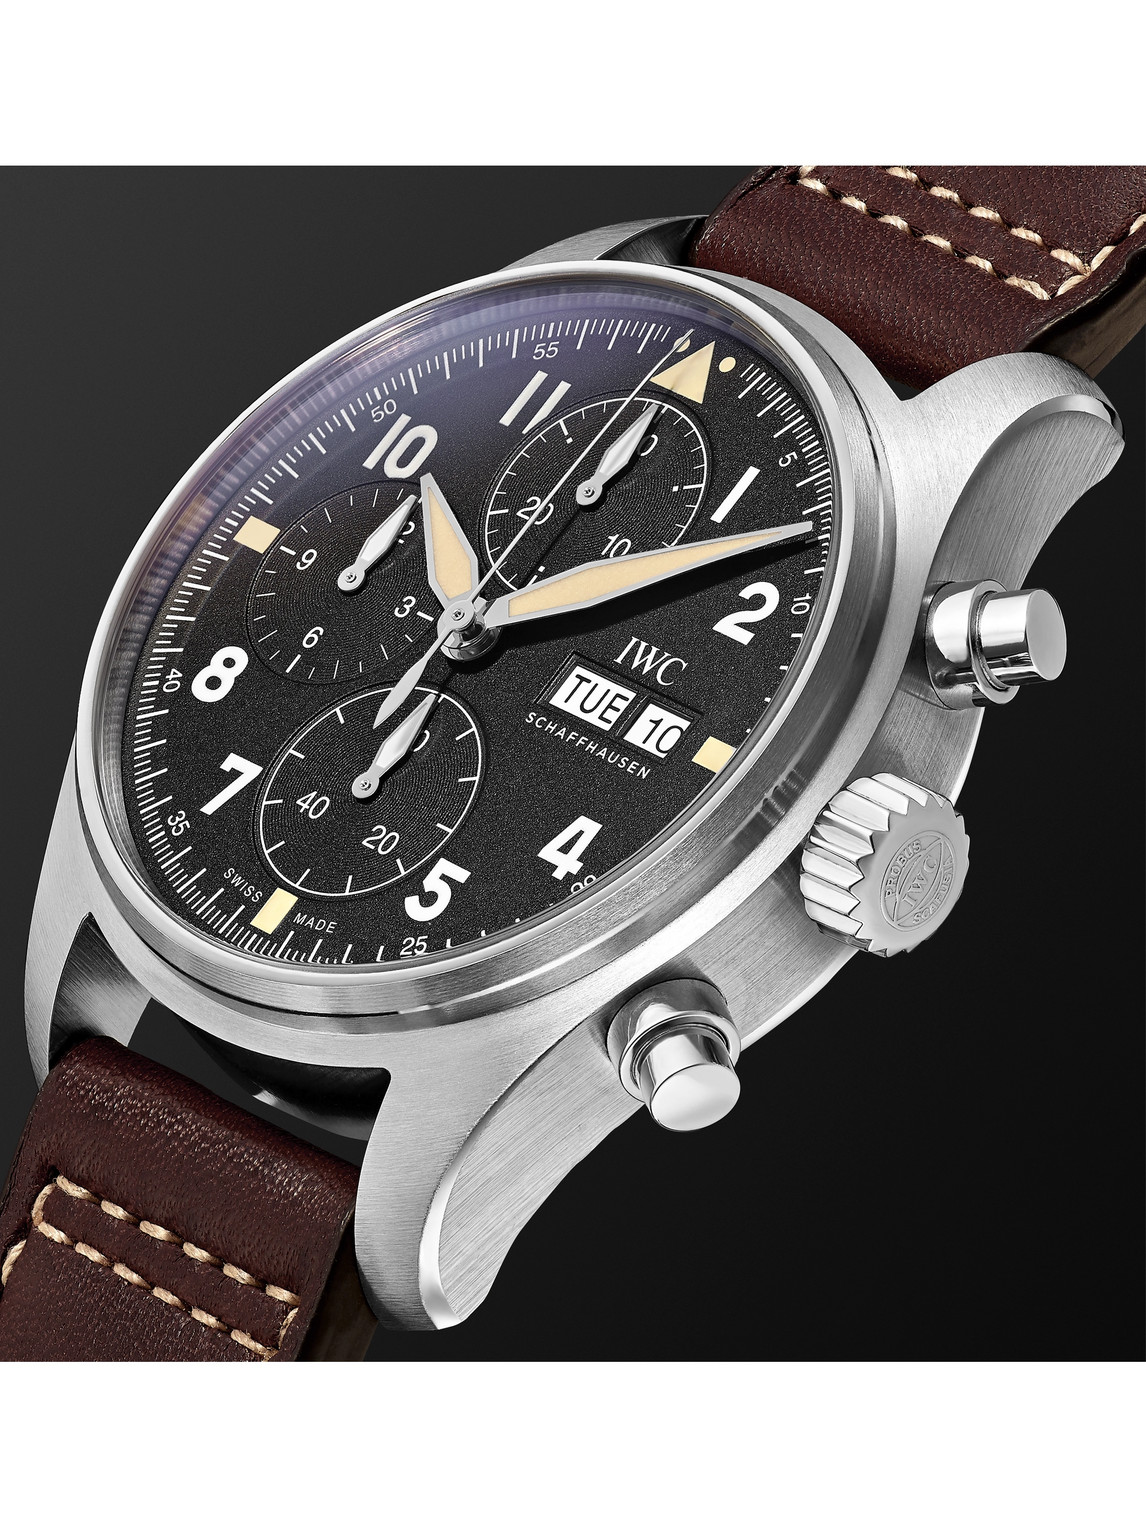 Shop Iwc Schaffhausen Pilot's Spitfire Automatic Chronograph 41mm Stainless Steel And Leather Watch, Ref. No. Iw387903 In Black